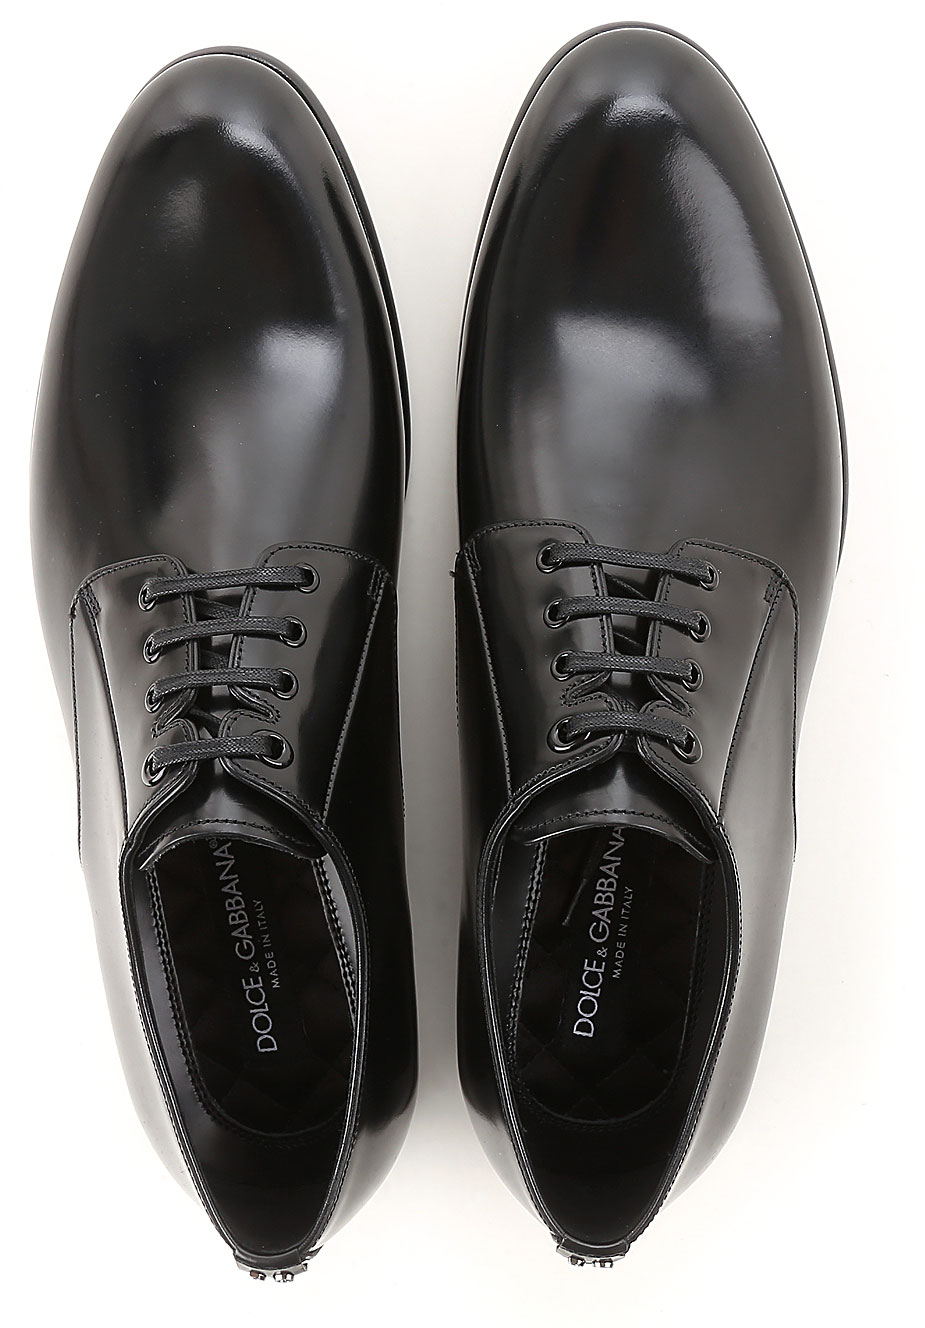 Mens Shoes Dolce & Gabbana, Style code: a10306-ac460-80999